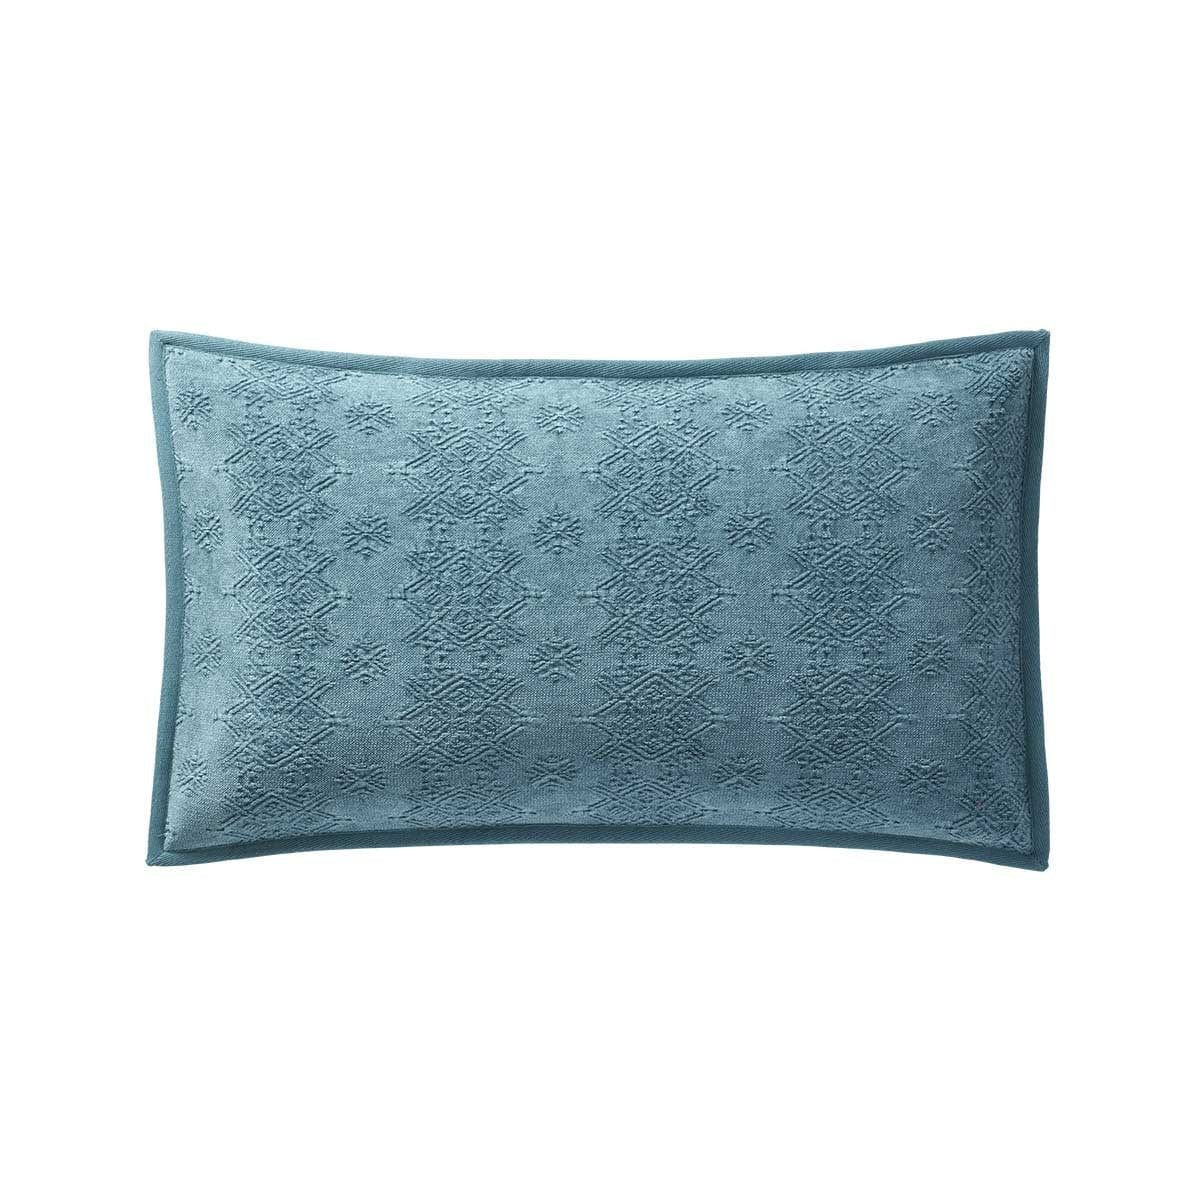 Decorative Pillows Iosis Syracuse Decorative Pillow by Yves Delorme Turquoise Yves Delorme